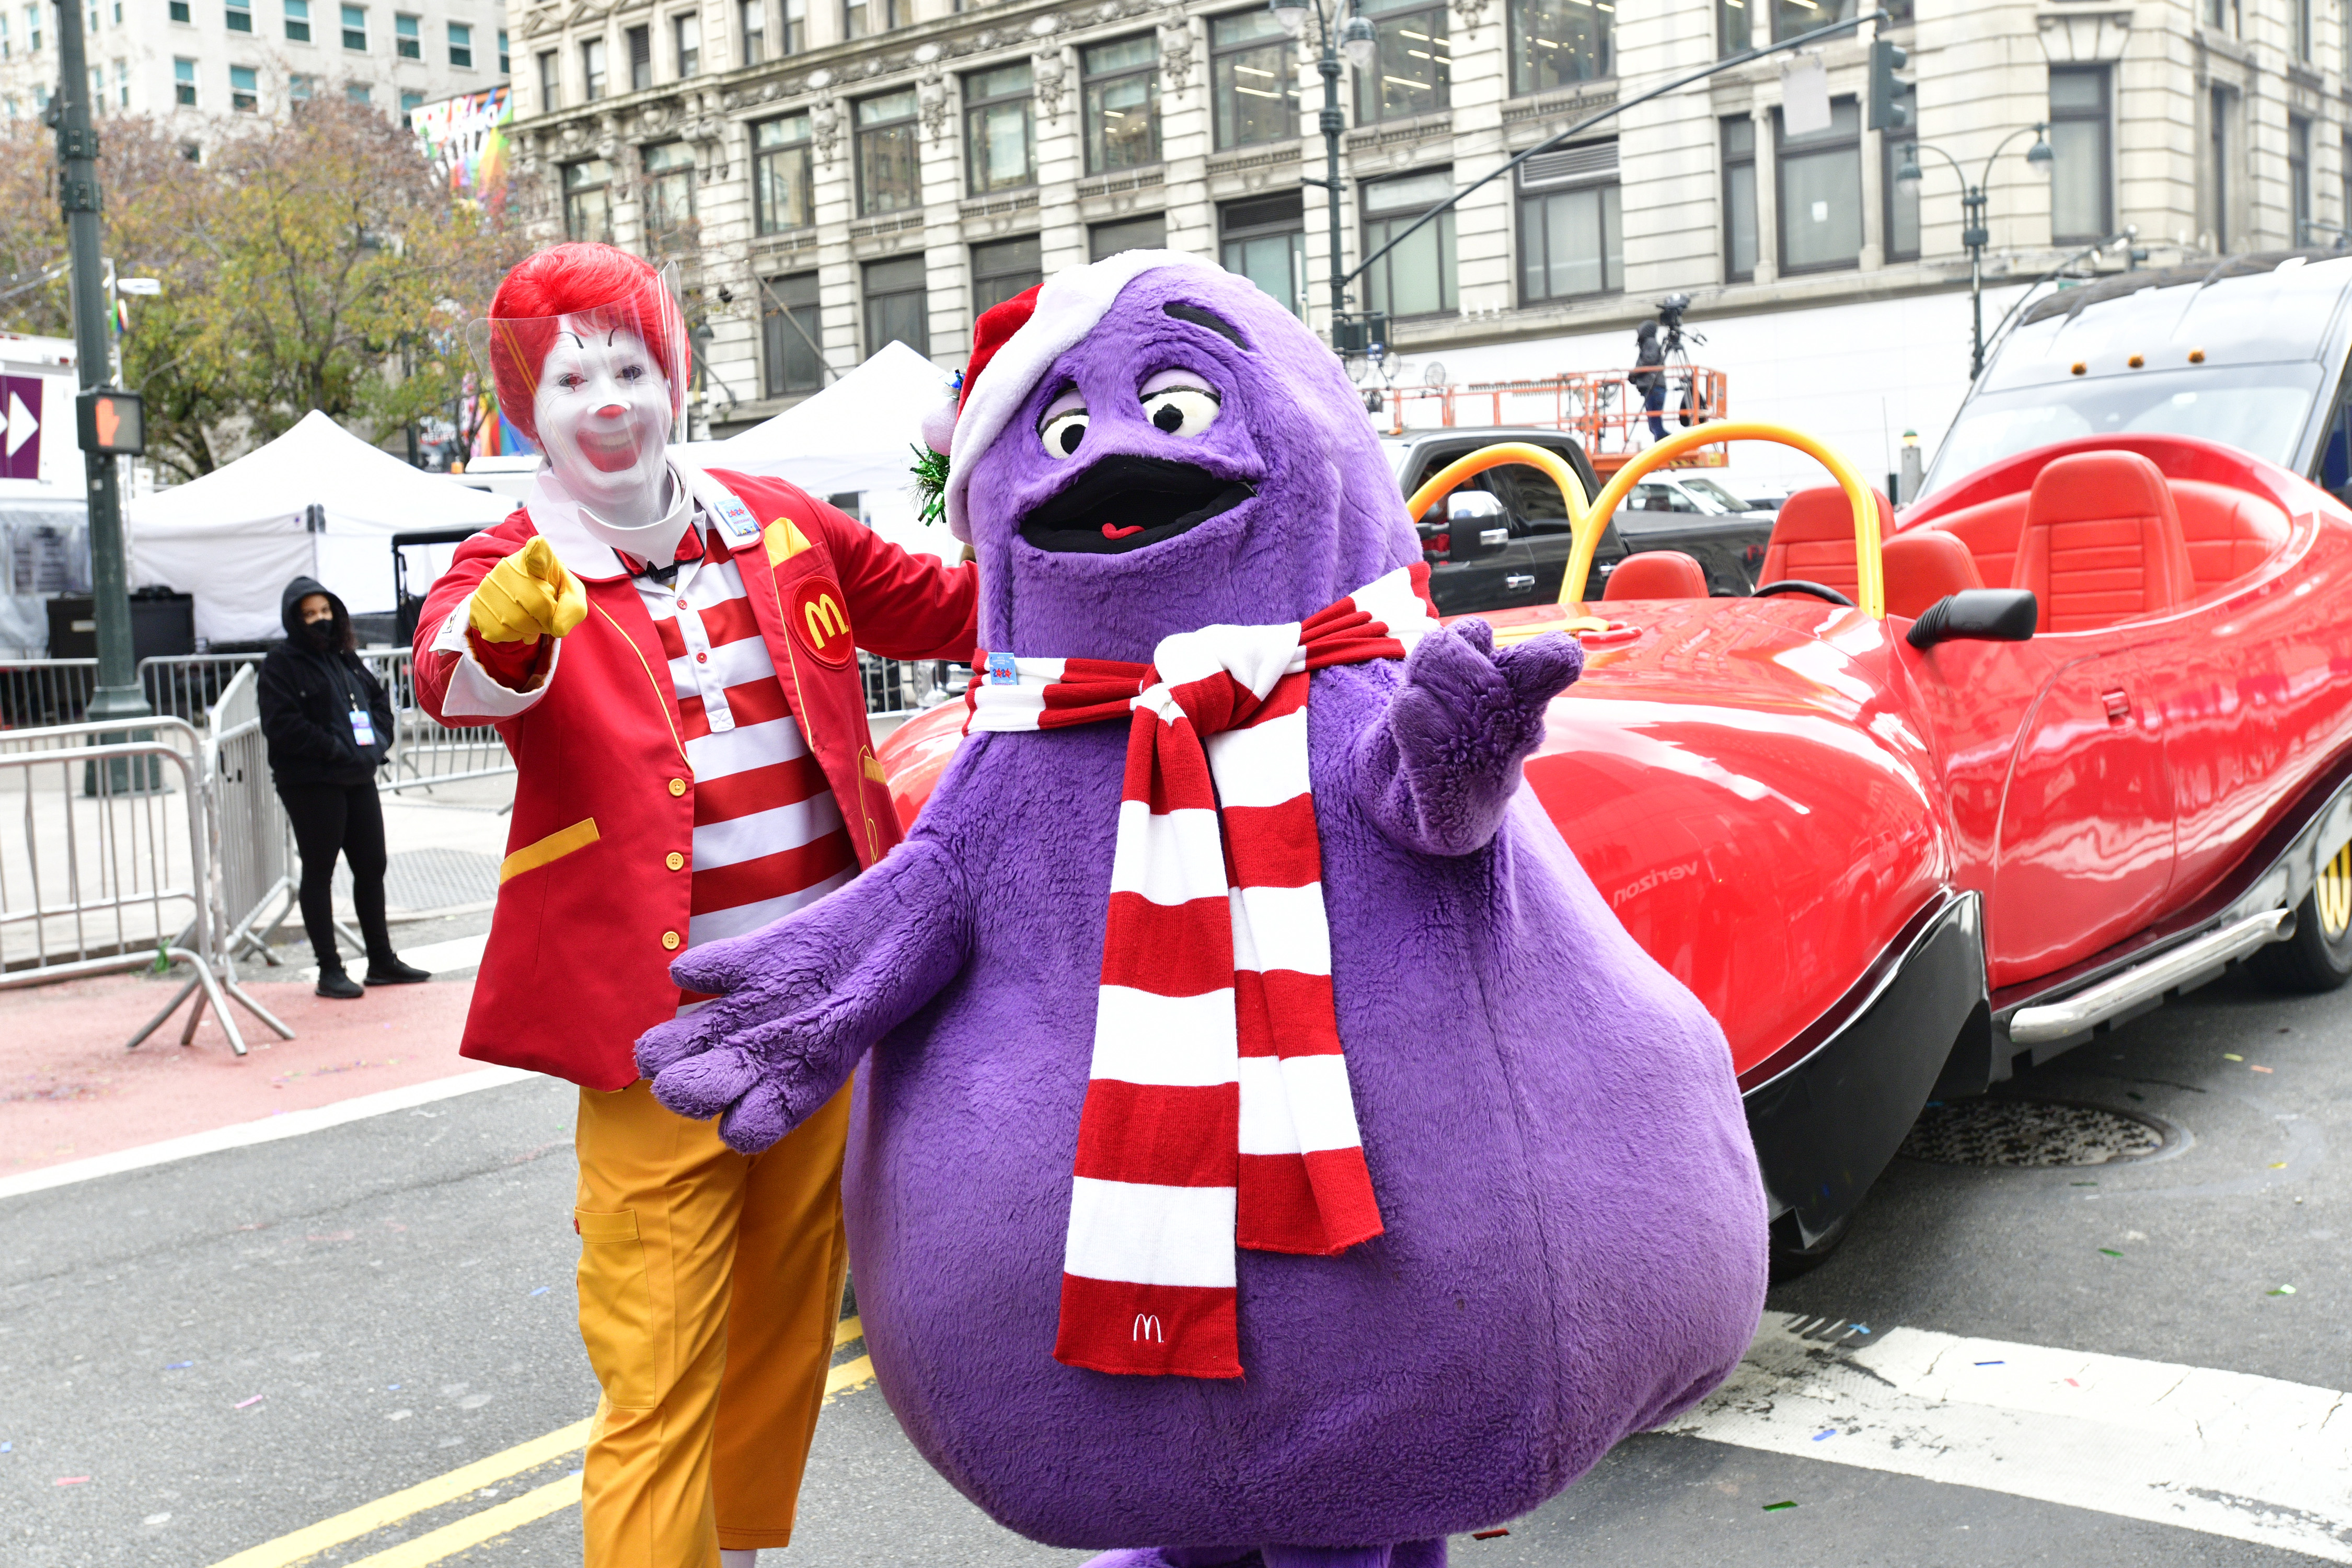 McDonald's released a purple milkshake in honor of Grimace's birthday and I'm obsessed